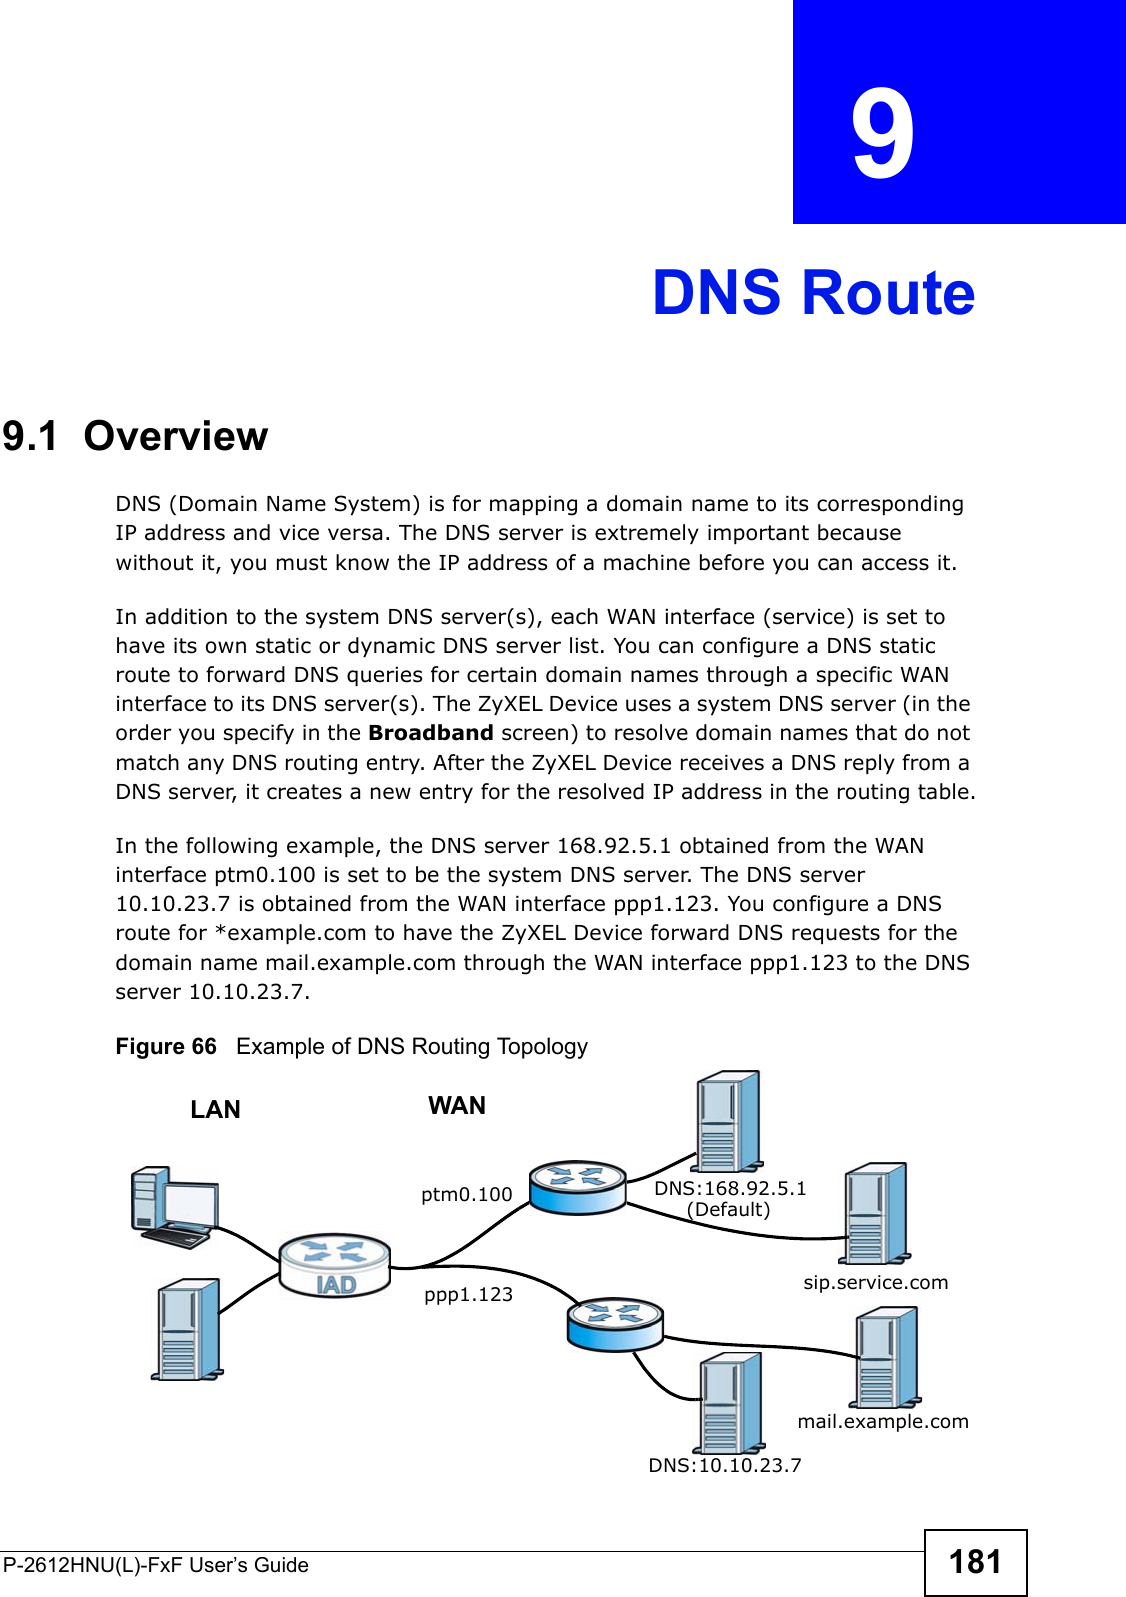 P-2612HNU(L)-FxF User’s Guide 181CHAPTER   9 DNS Route9.1  Overview   DNS (Domain Name System) is for mapping a domain name to its corresponding IP address and vice versa. The DNS server is extremely important because without it, you must know the IP address of a machine before you can access it. In addition to the system DNS server(s), each WAN interface (service) is set to have its own static or dynamic DNS server list. You can configure a DNS static route to forward DNS queries for certain domain names through a specific WANinterface to its DNS server(s). The ZyXEL Device uses a system DNS server (in the order you specify in the Broadband screen) to resolve domain names that do notmatch any DNS routing entry. After the ZyXEL Device receives a DNS reply from a DNS server, it creates a new entry for the resolved IP address in the routing table.In the following example, the DNS server 168.92.5.1 obtained from the WAN interface ptm0.100 is set to be the system DNS server. The DNS server 10.10.23.7 is obtained from the WAN interface ppp1.123. You configure a DNSroute for *example.com to have the ZyXEL Device forward DNS requests for the domain name mail.example.com through the WAN interface ppp1.123 to the DNS server 10.10.23.7.Figure 66   Example of DNS Routing TopologyWANLANptm0.100ppp1.123DNS:10.10.23.7DNS:168.92.5.1sip.service.commail.example.com(Default)